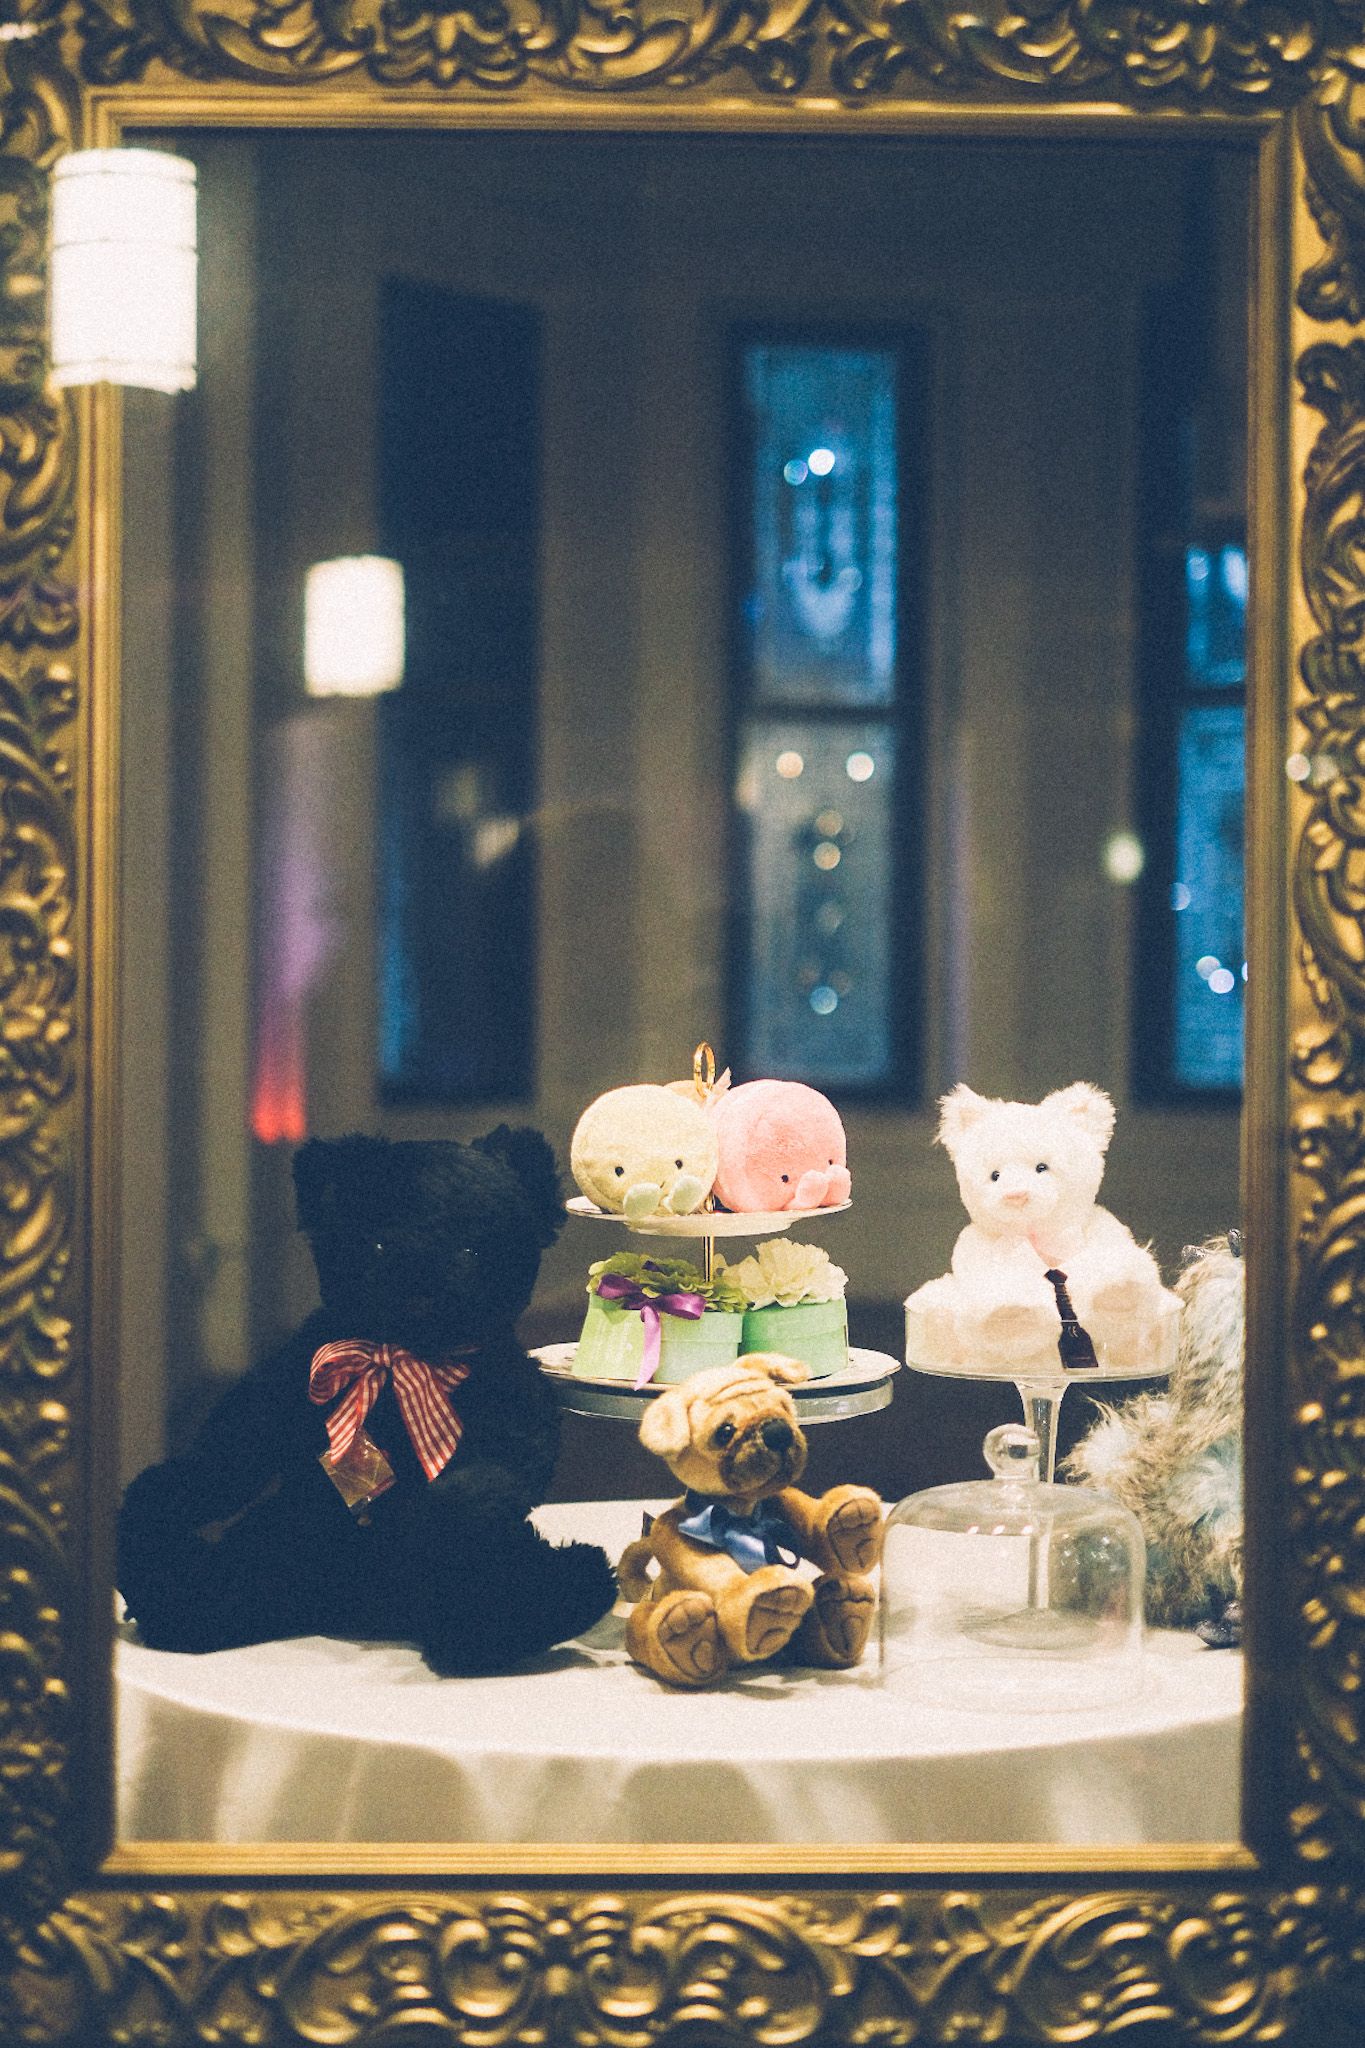 A few stuffed animals sit in the windowsill of an otherwise empty storefront, windows in the background showing night lights. A few of the stuffed things sit on a three tiered tea tray. An ornate gold frame is framing the picture.